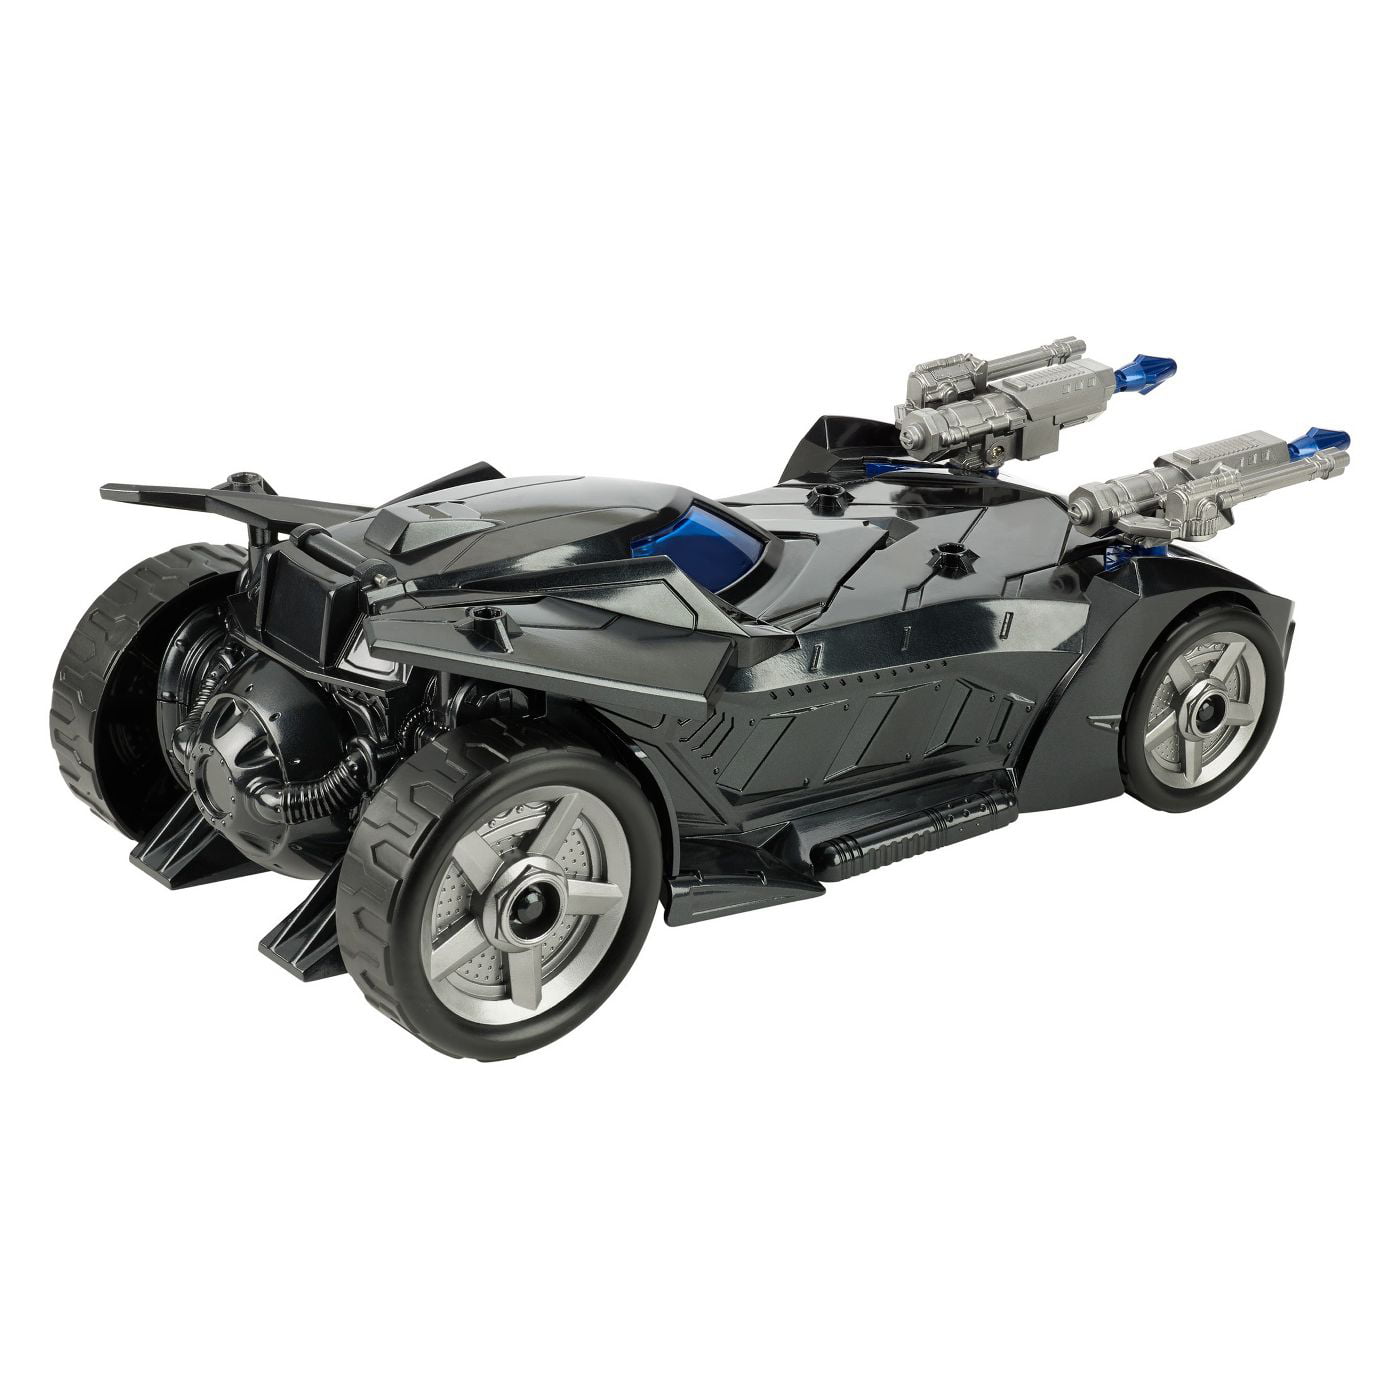 DC Batman Missions and Missile Launching Batmobile Vehicle 